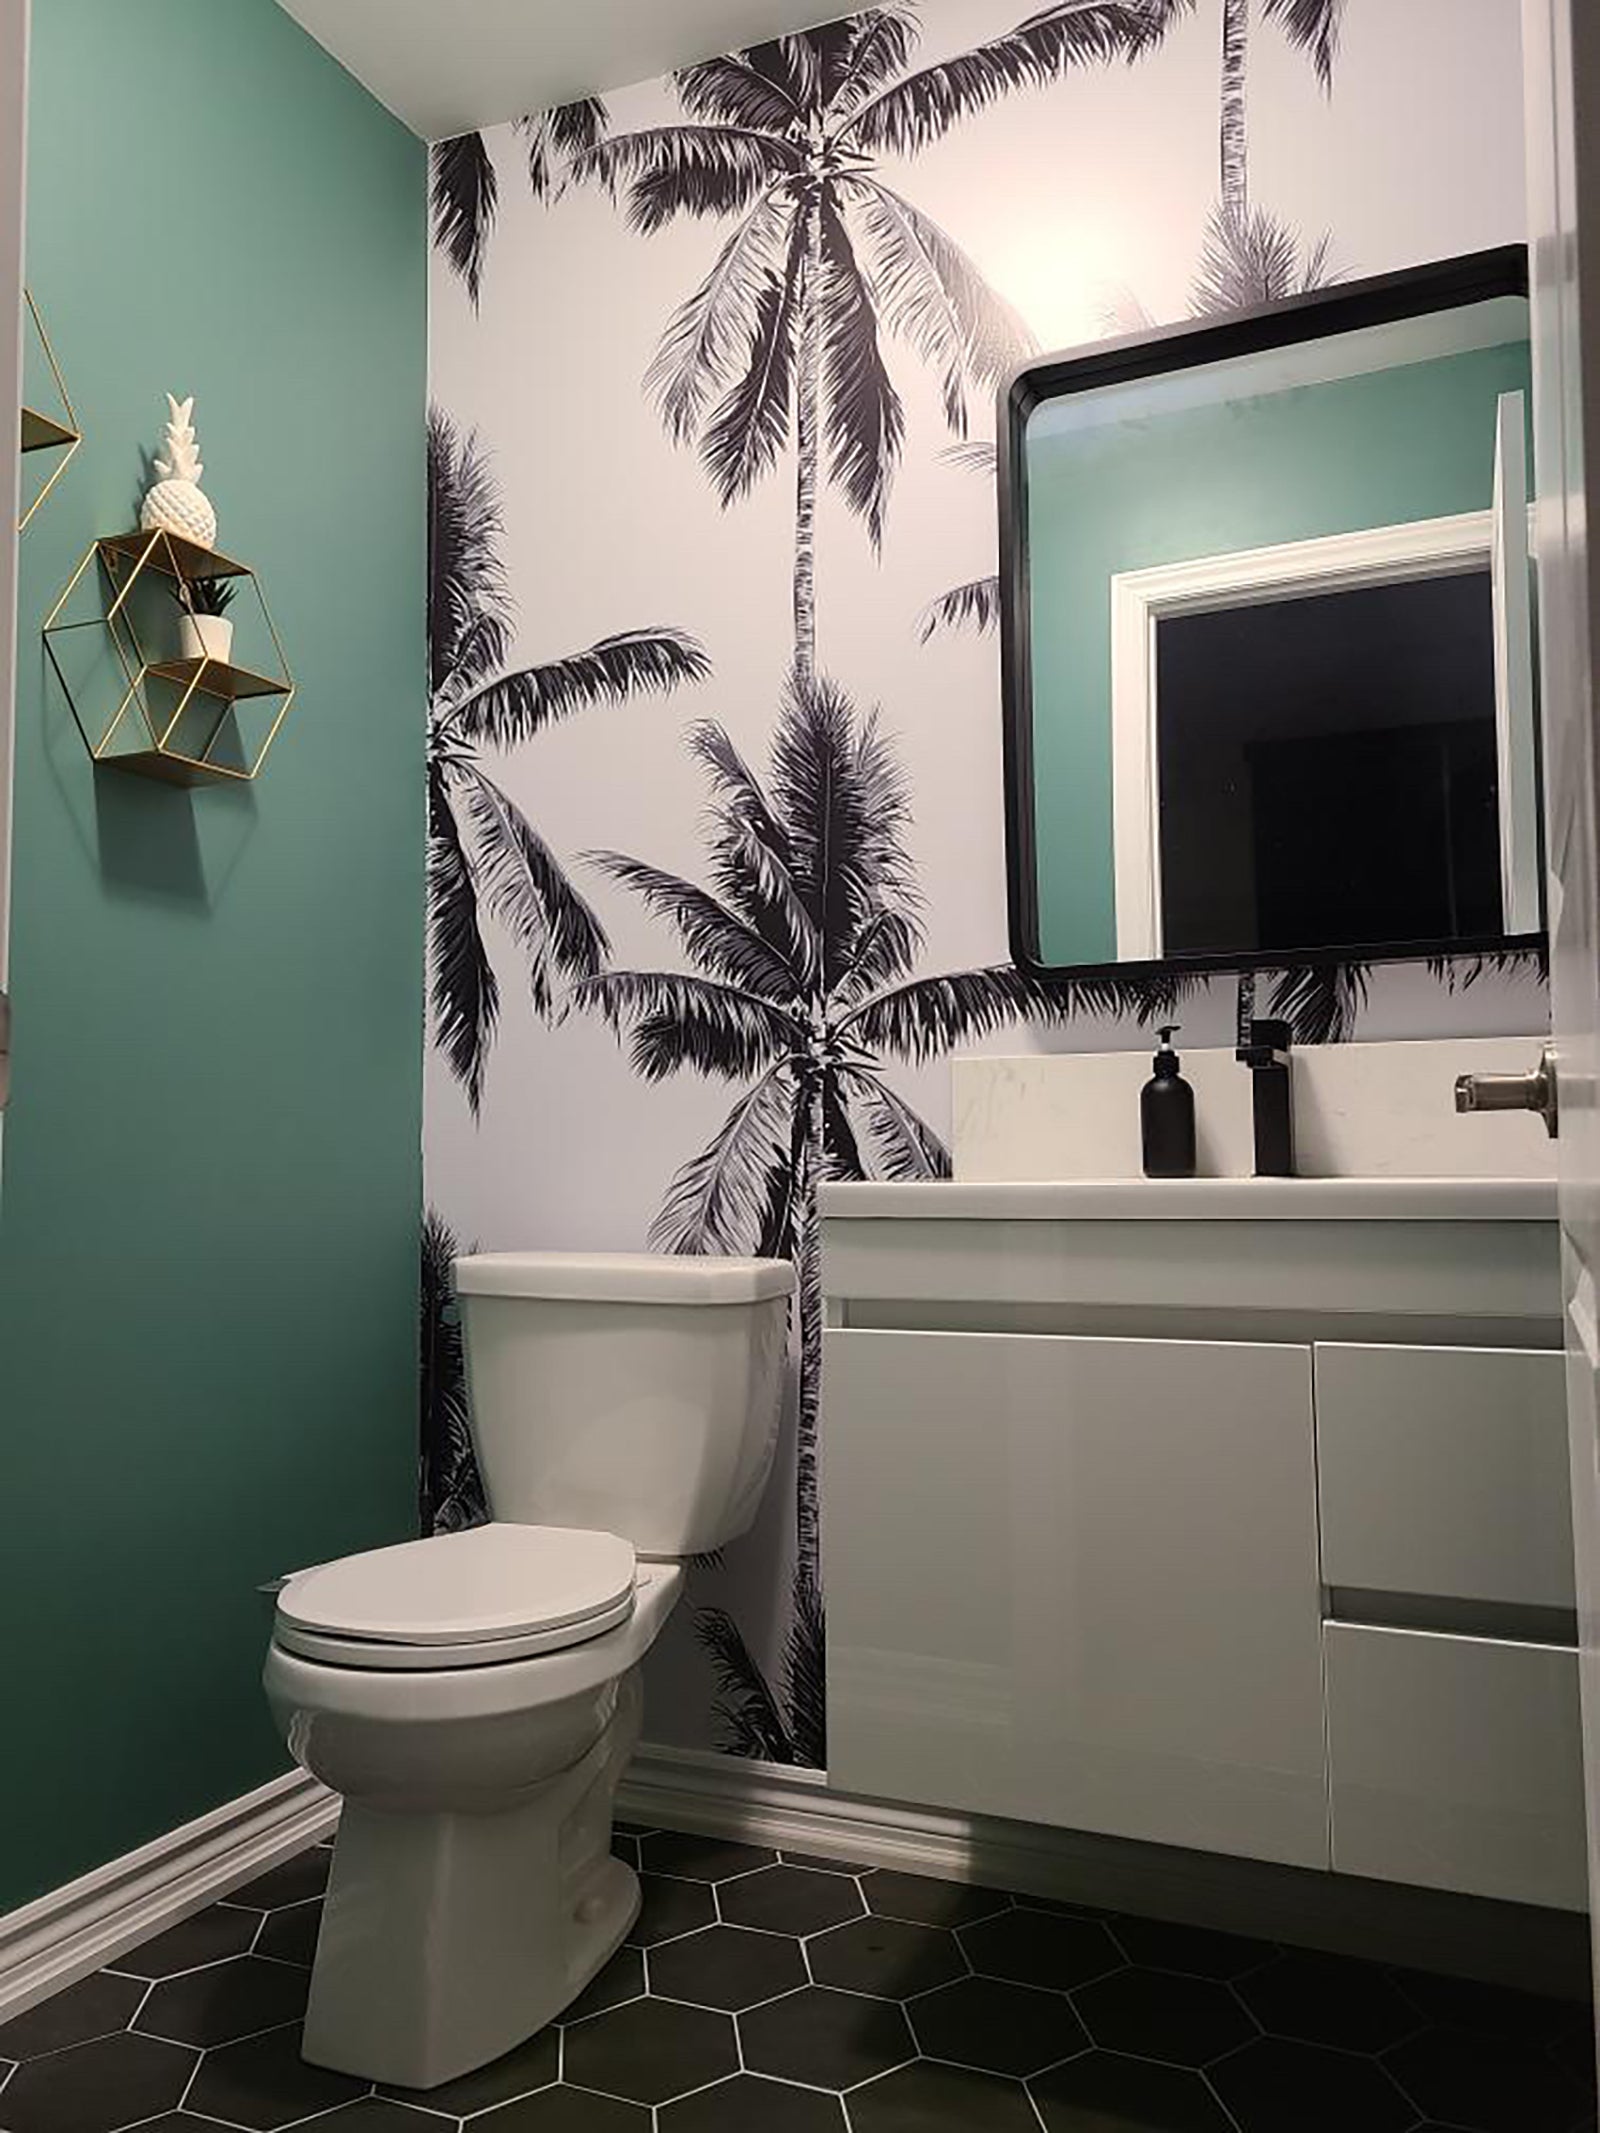 Where to Buy Palm Tree Leaf & Tropical Print Wallpaper | Apartment Therapy